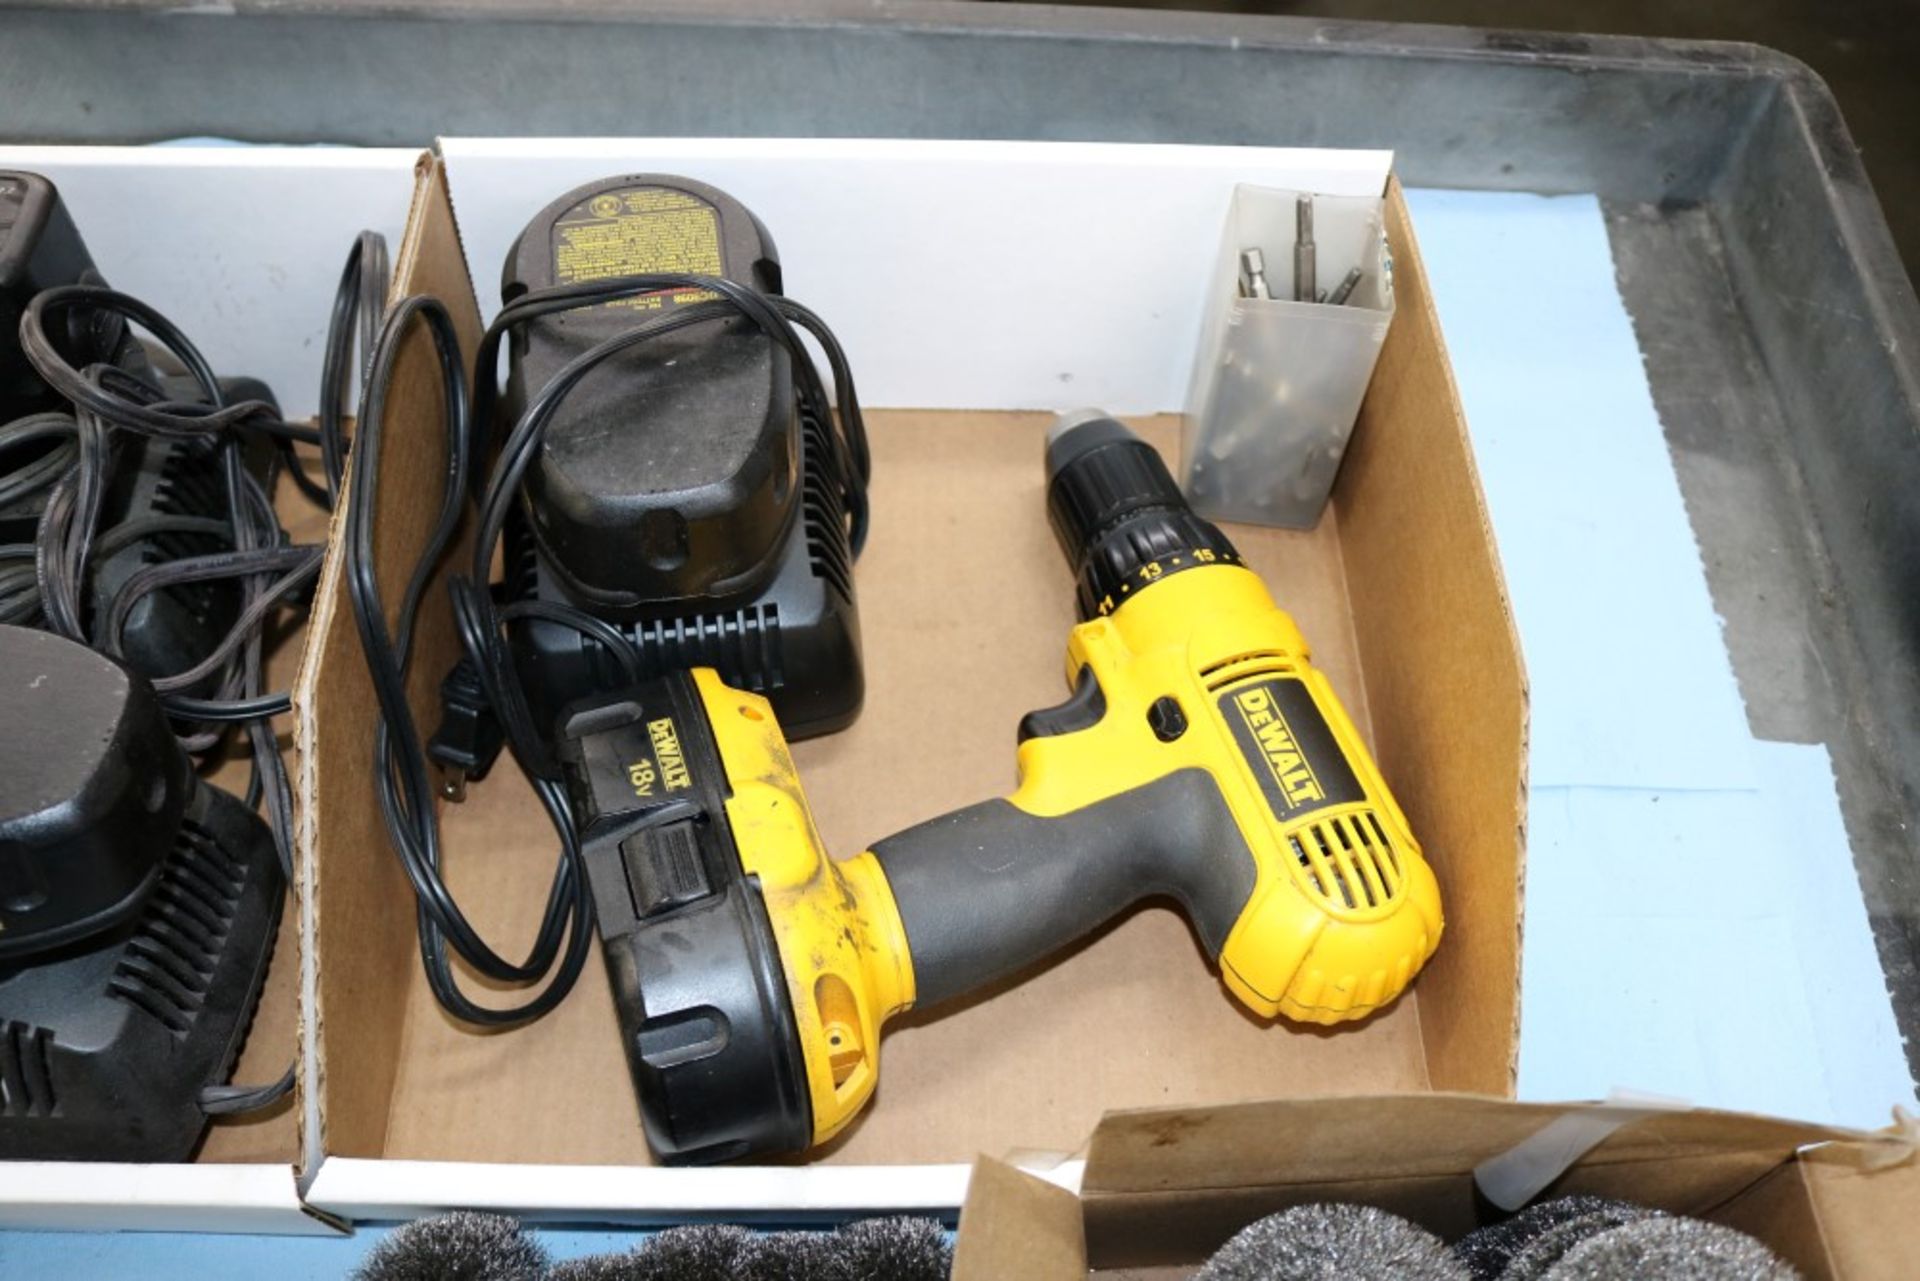 DeWalt Cordless Angle Drills with 2 Extra batteries and Chargers, Chuck Attachments, Box of Copper - Image 4 of 6